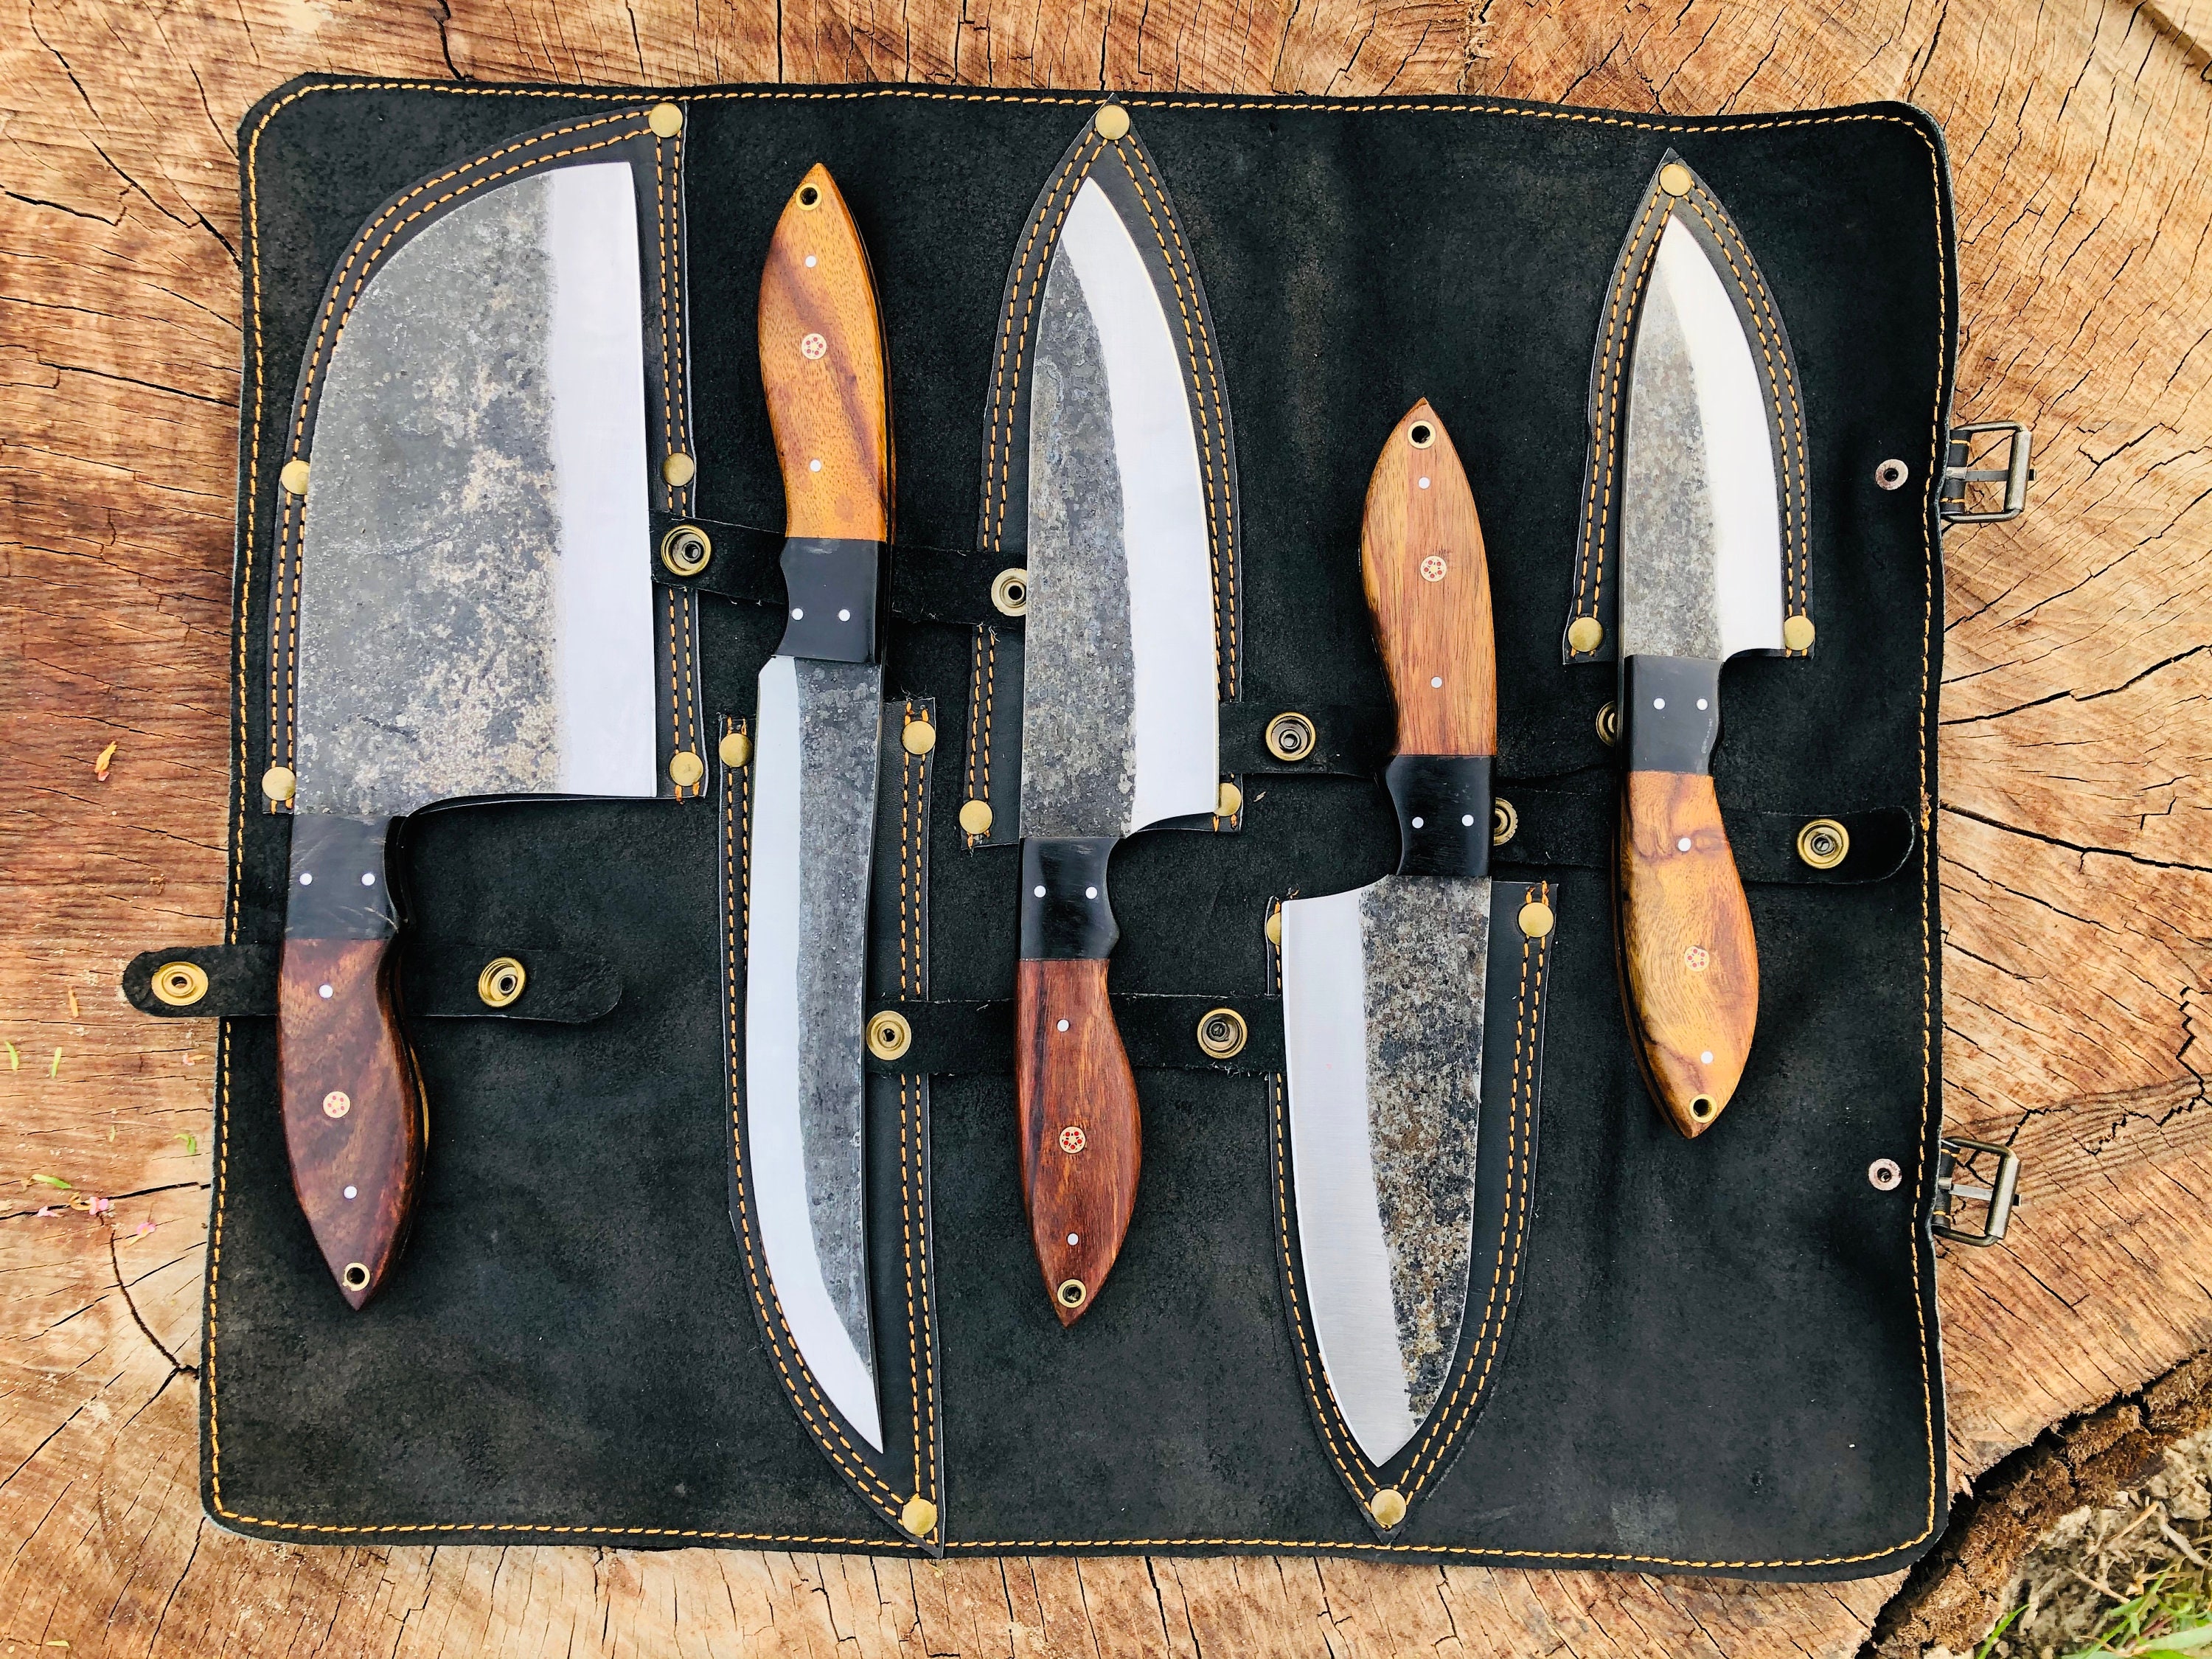 Handmade Damascus Chef Knife Set of 7 BBQ Knife Kitchen Knives Gift for  Father Anniversary Gift Camping Knife Gift for Him Groomsmen Gift 